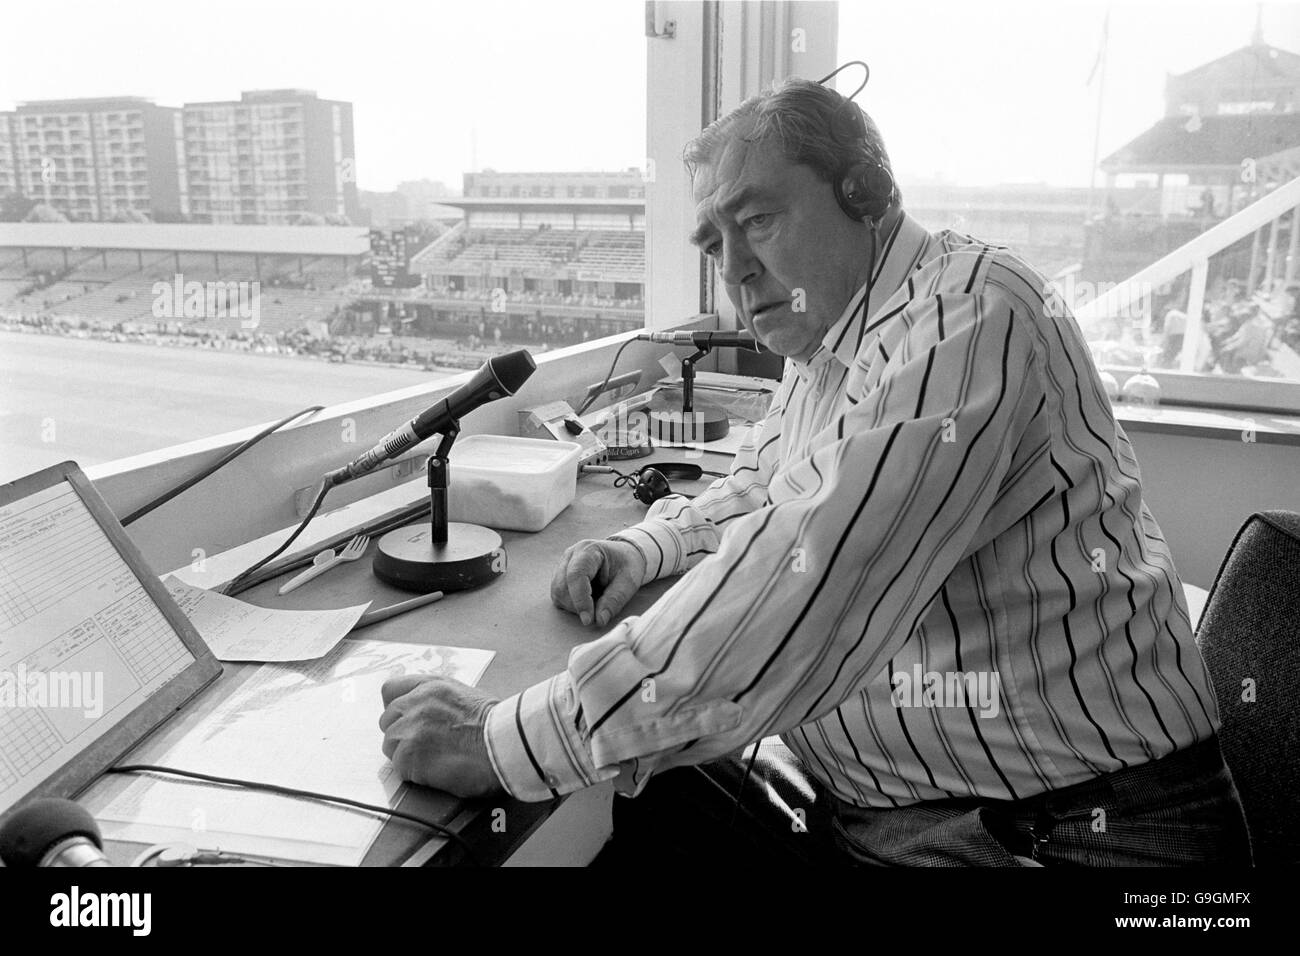 Cricket - The Centenary Test - England v Australia - Day Five - Lord's. BBC Radio commentator John Arlott pictured during the last day of his final commentary Stock Photo